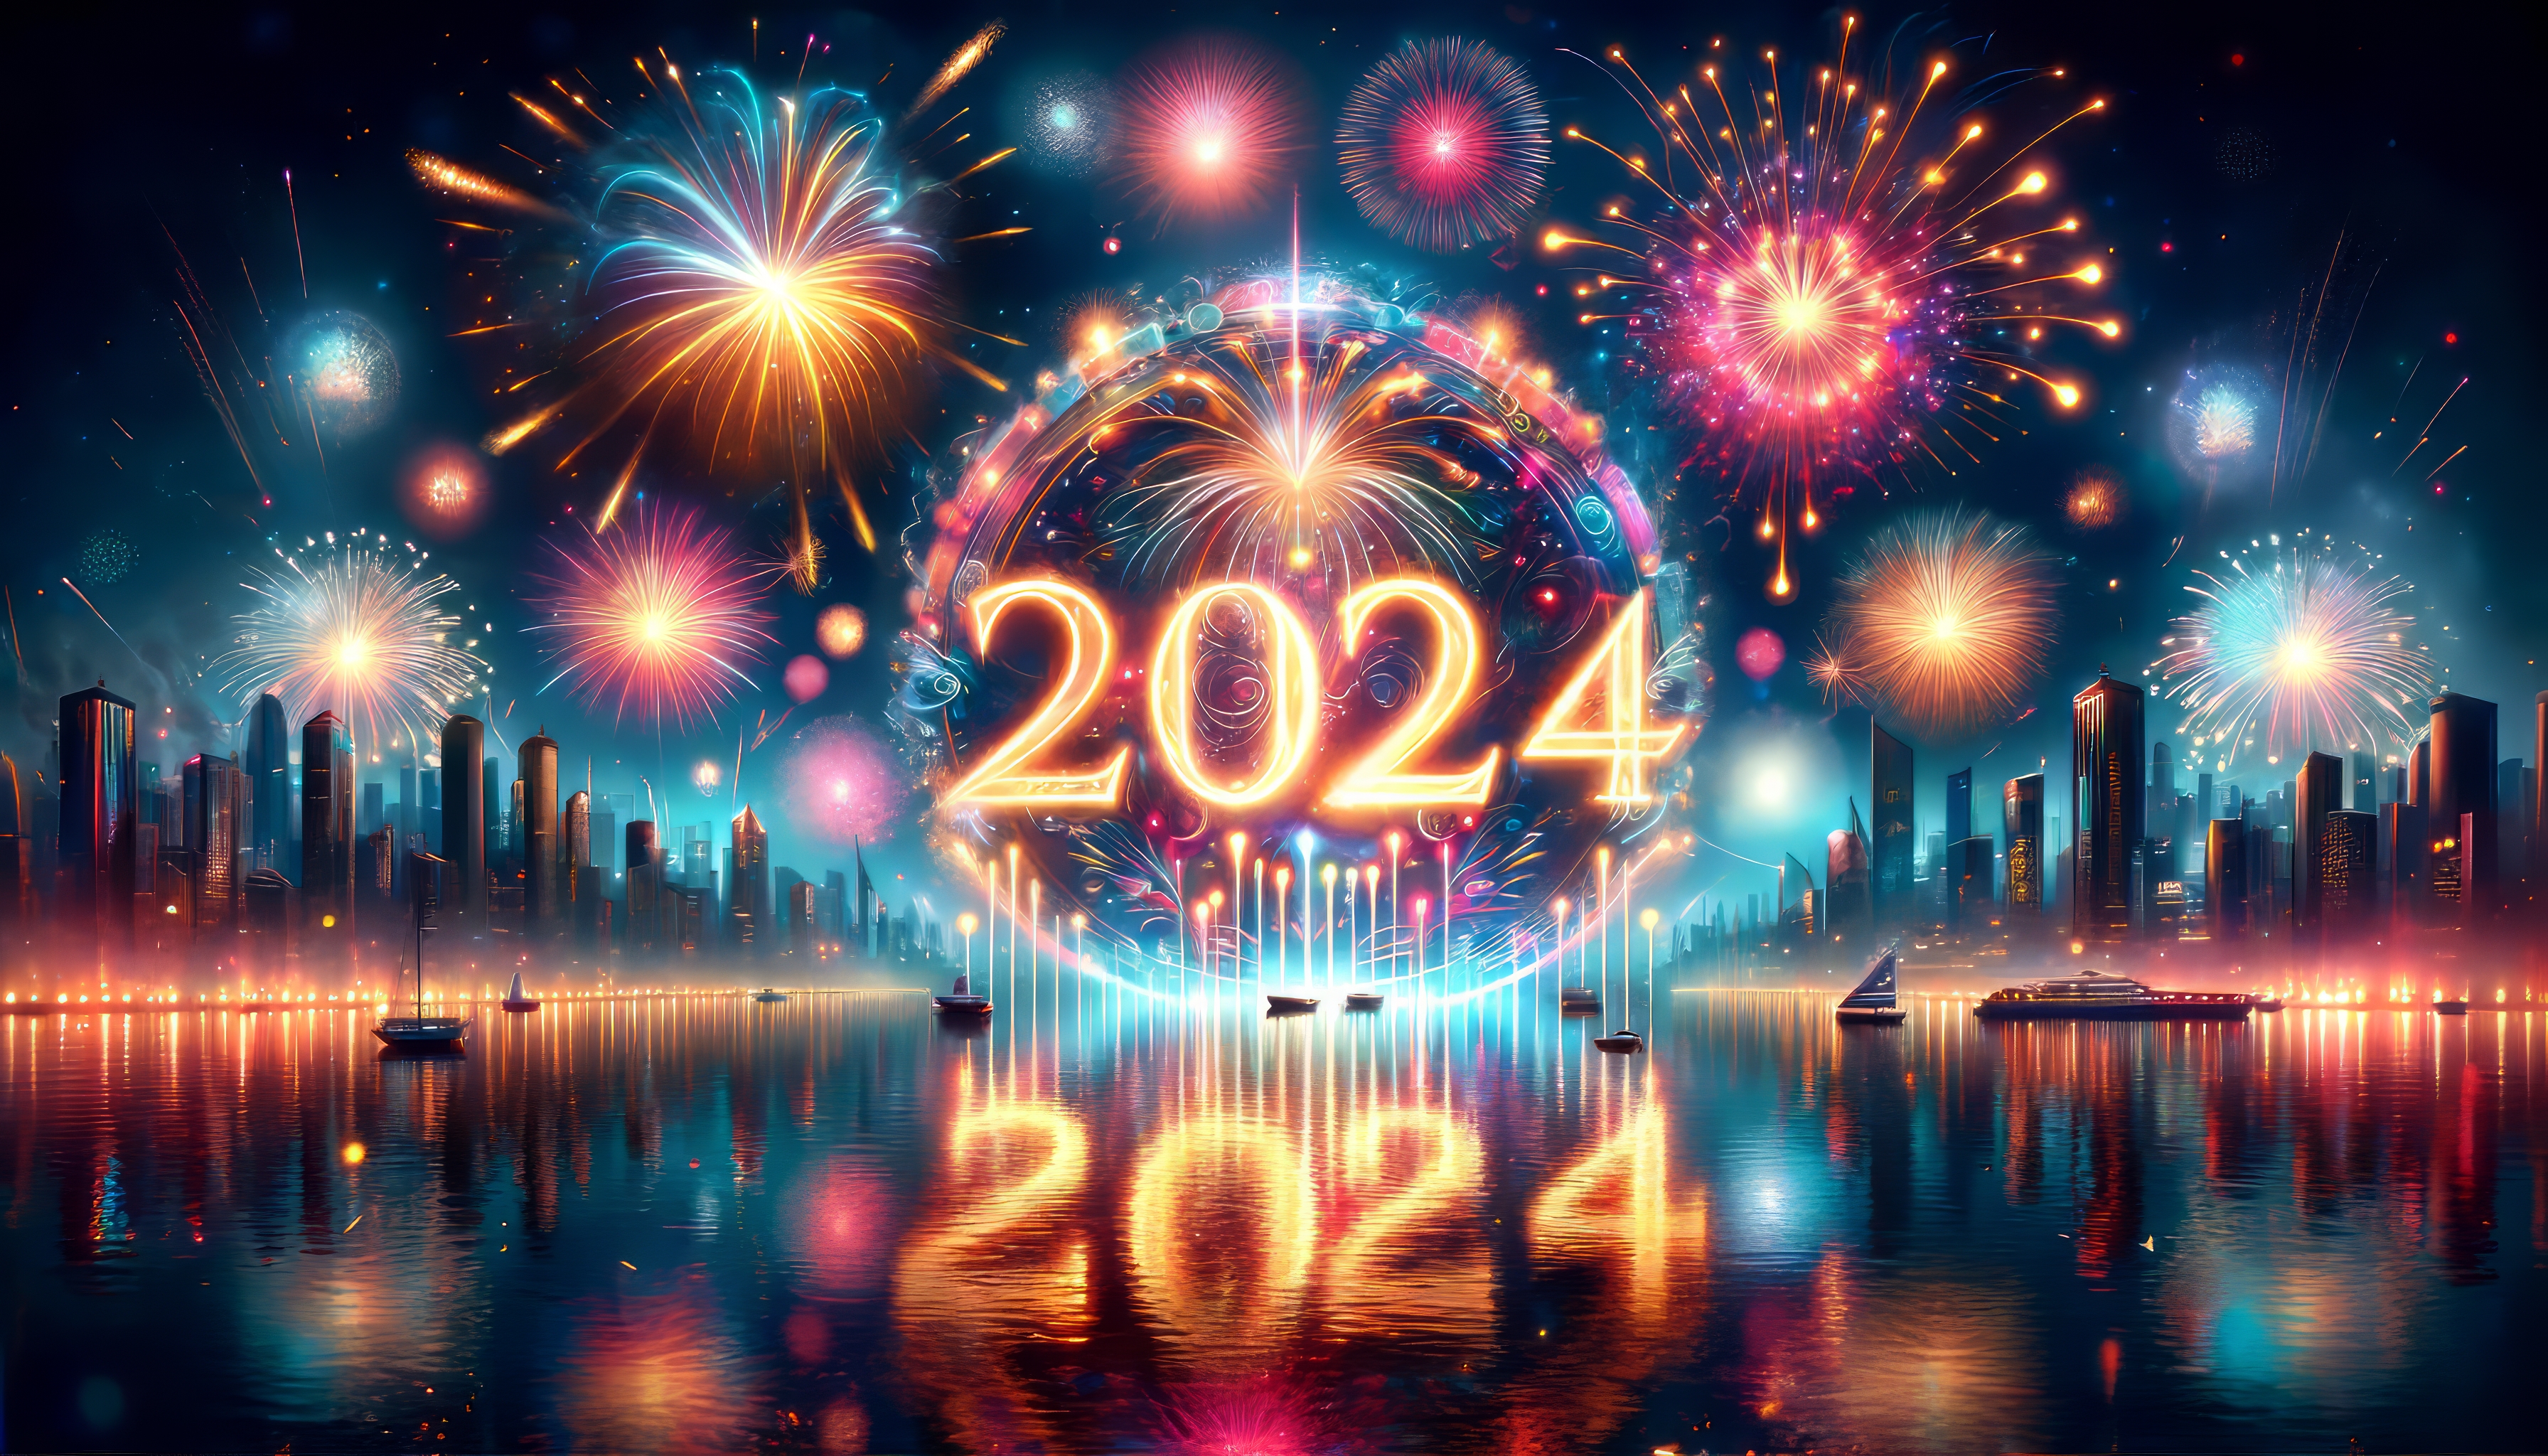 HD wallpaper of a vibrant 2024 New Year celebration with fireworks over a city skyline reflected in water for desktop background.